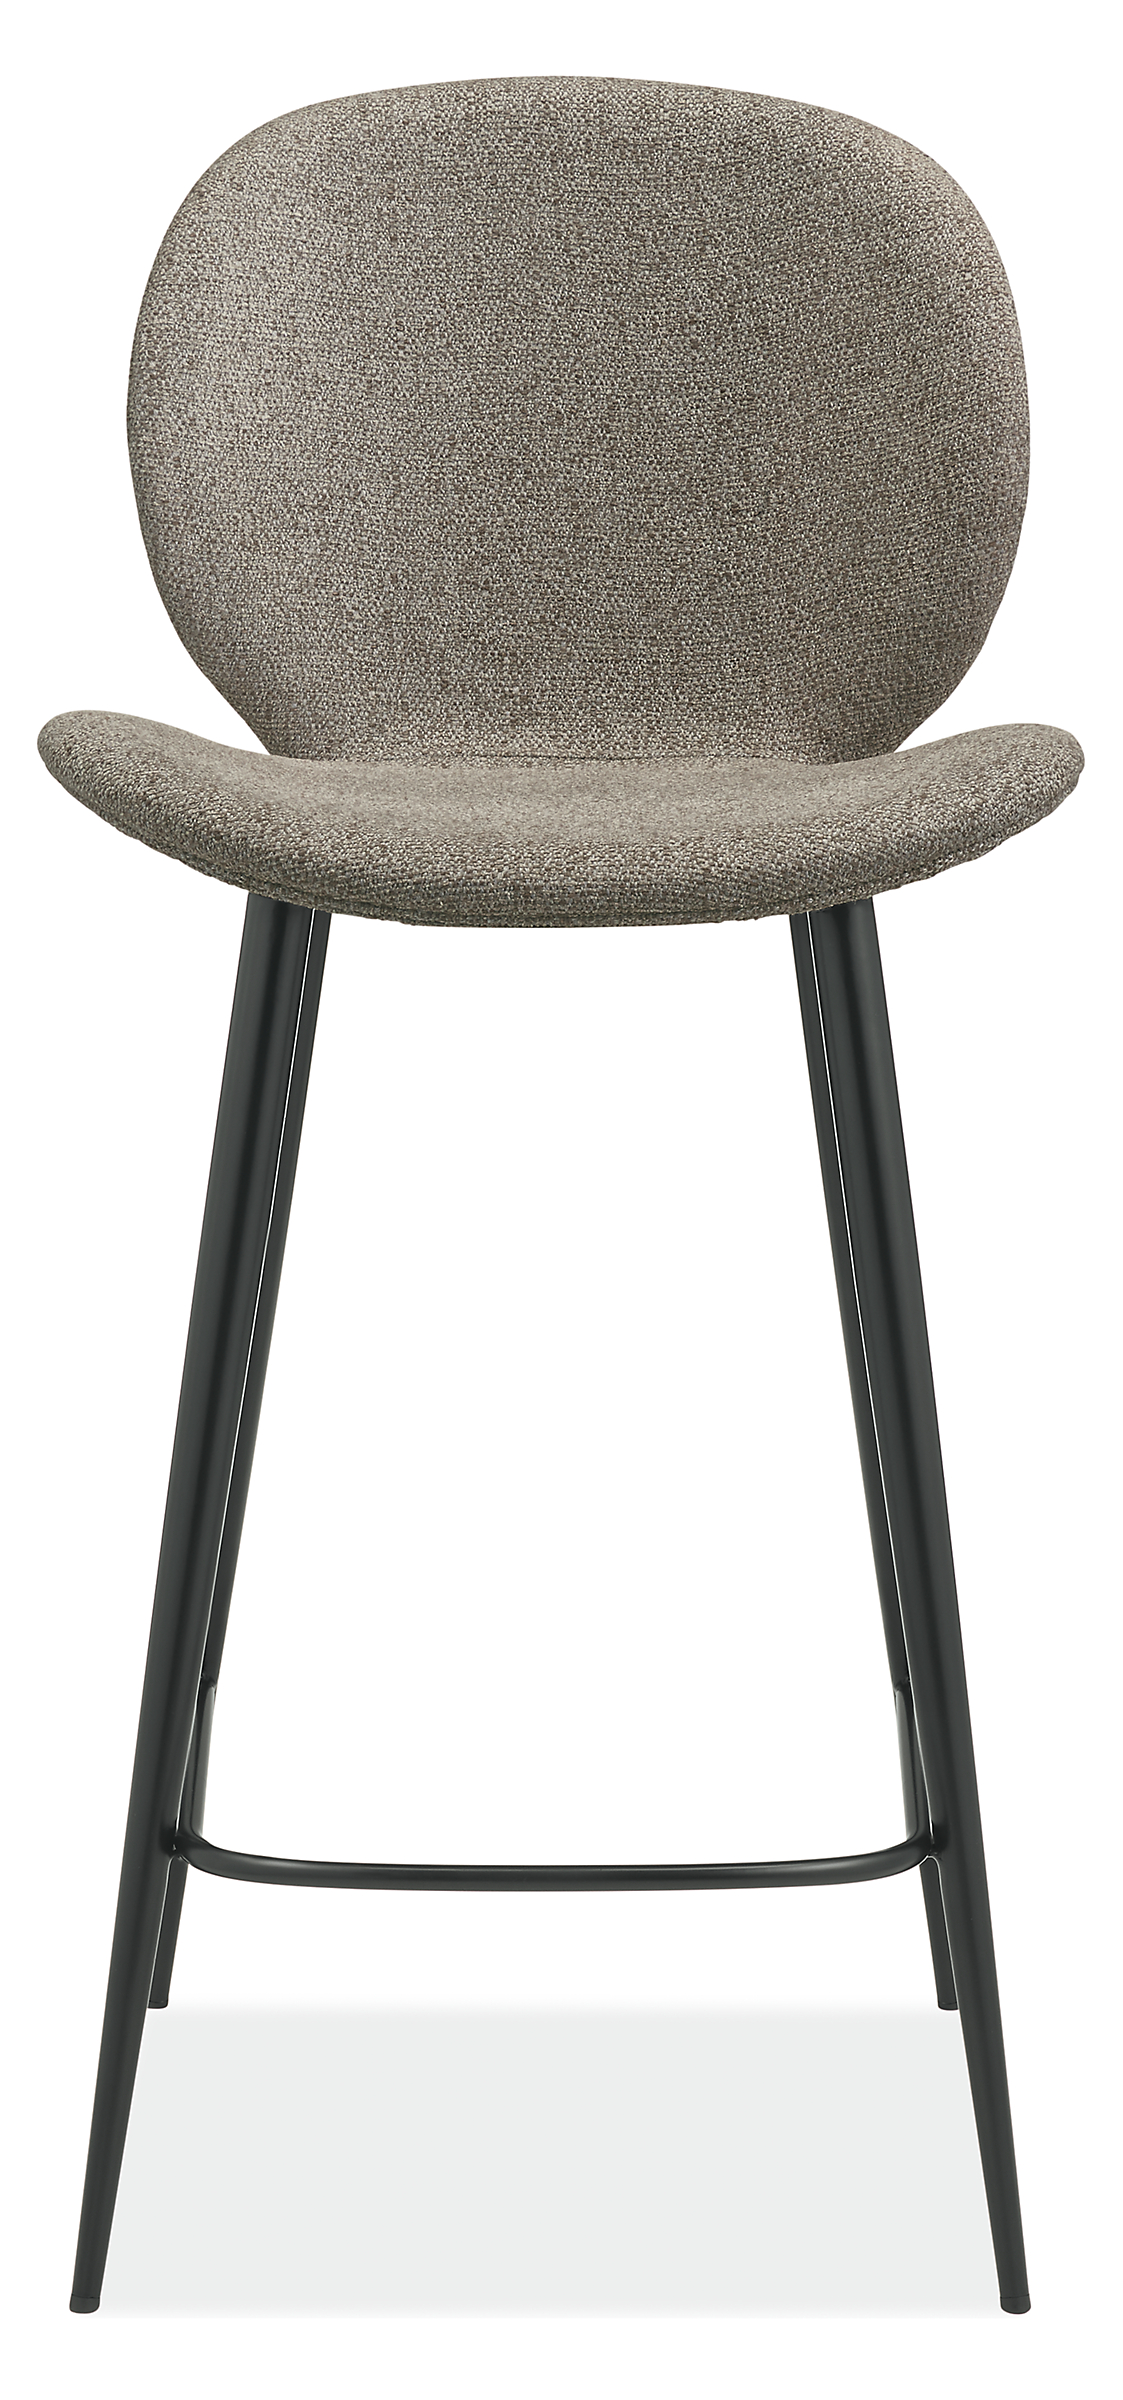 Front view of Gwen Counter Stool in Radford Fabric.